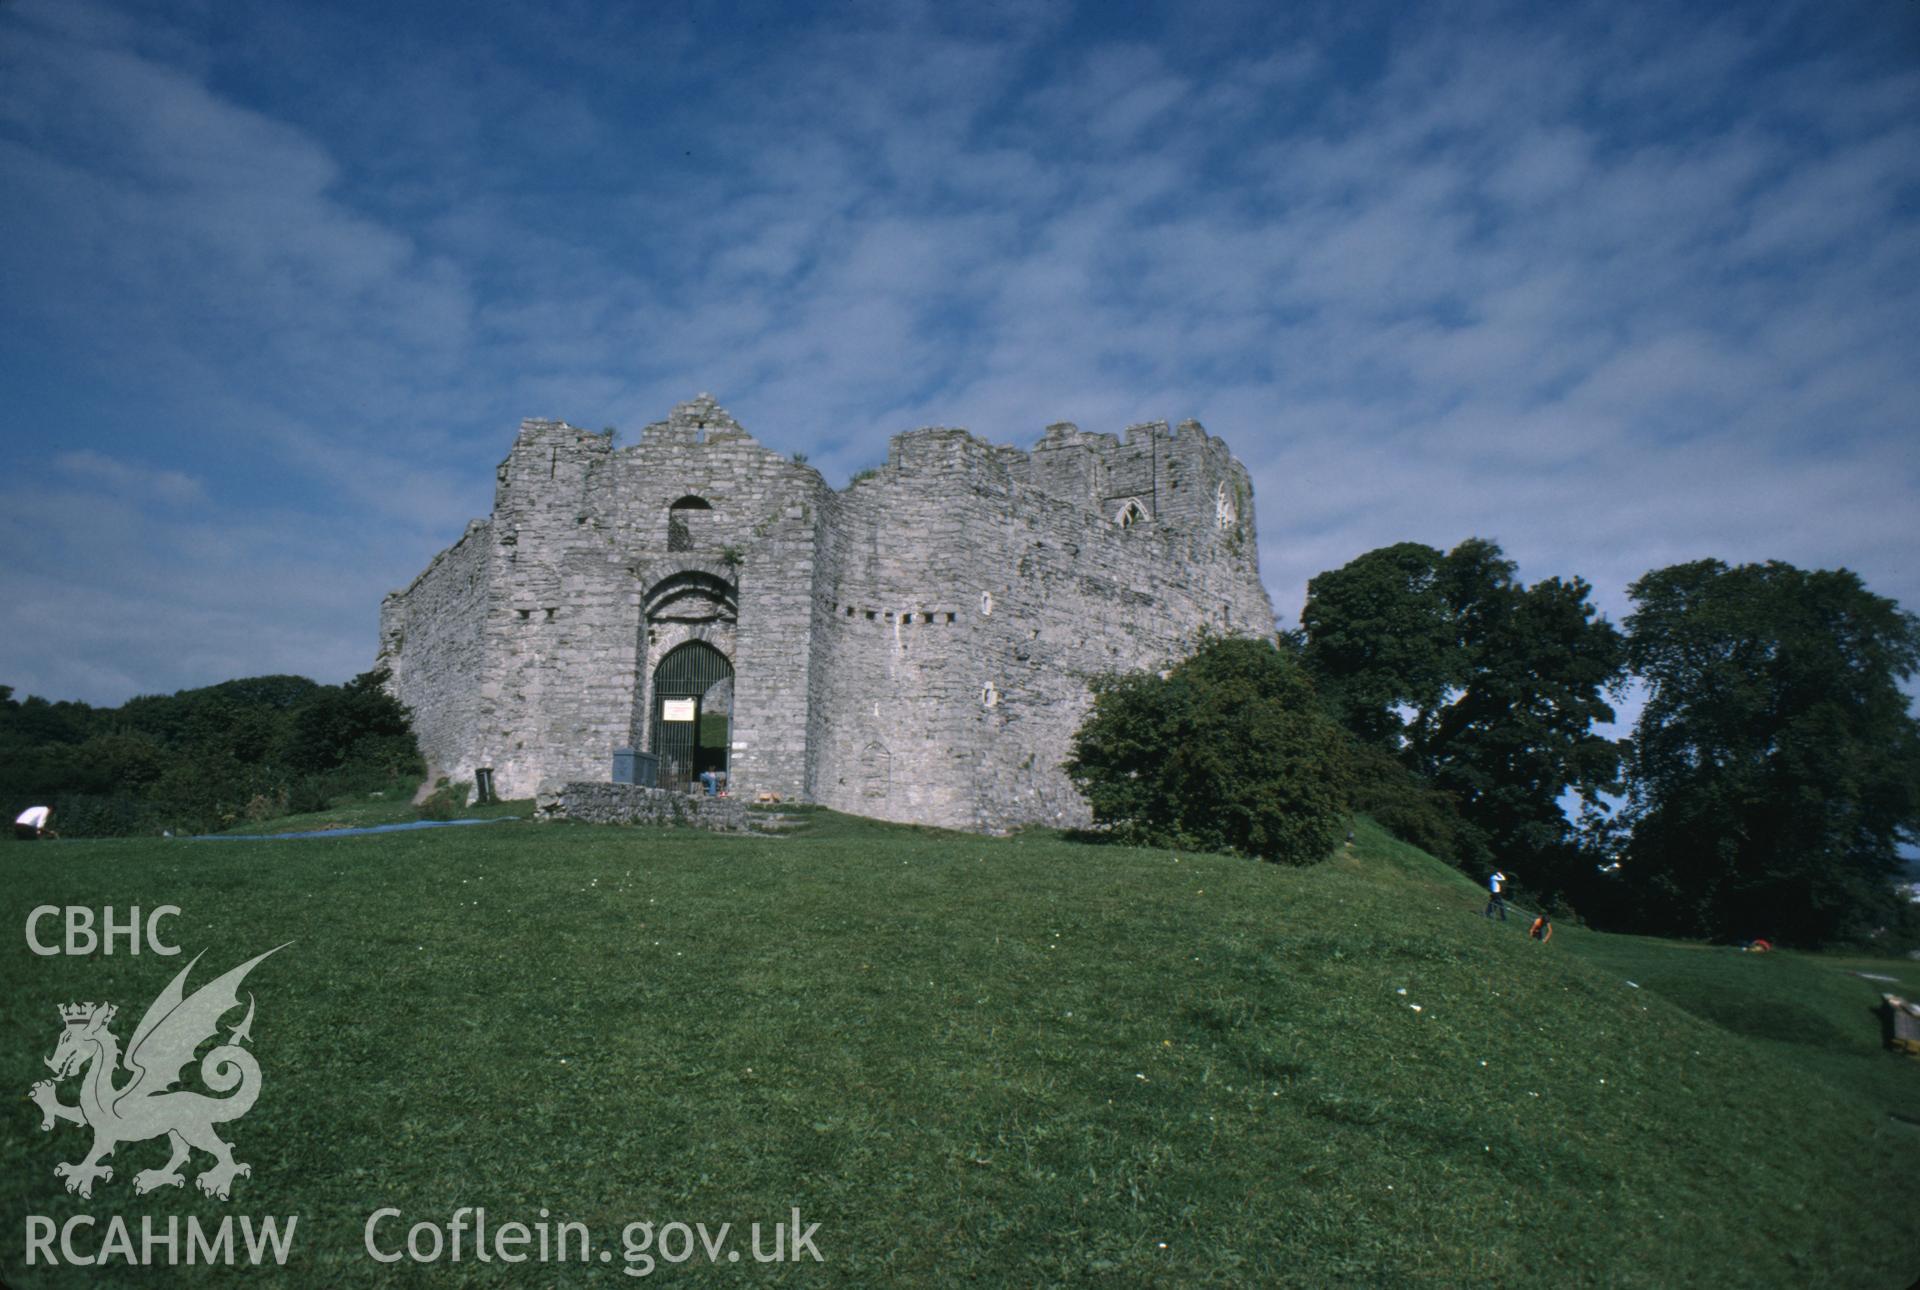 Colour photographic transparency showing Oystermouth Castle; collated by the former Central Office of Information.